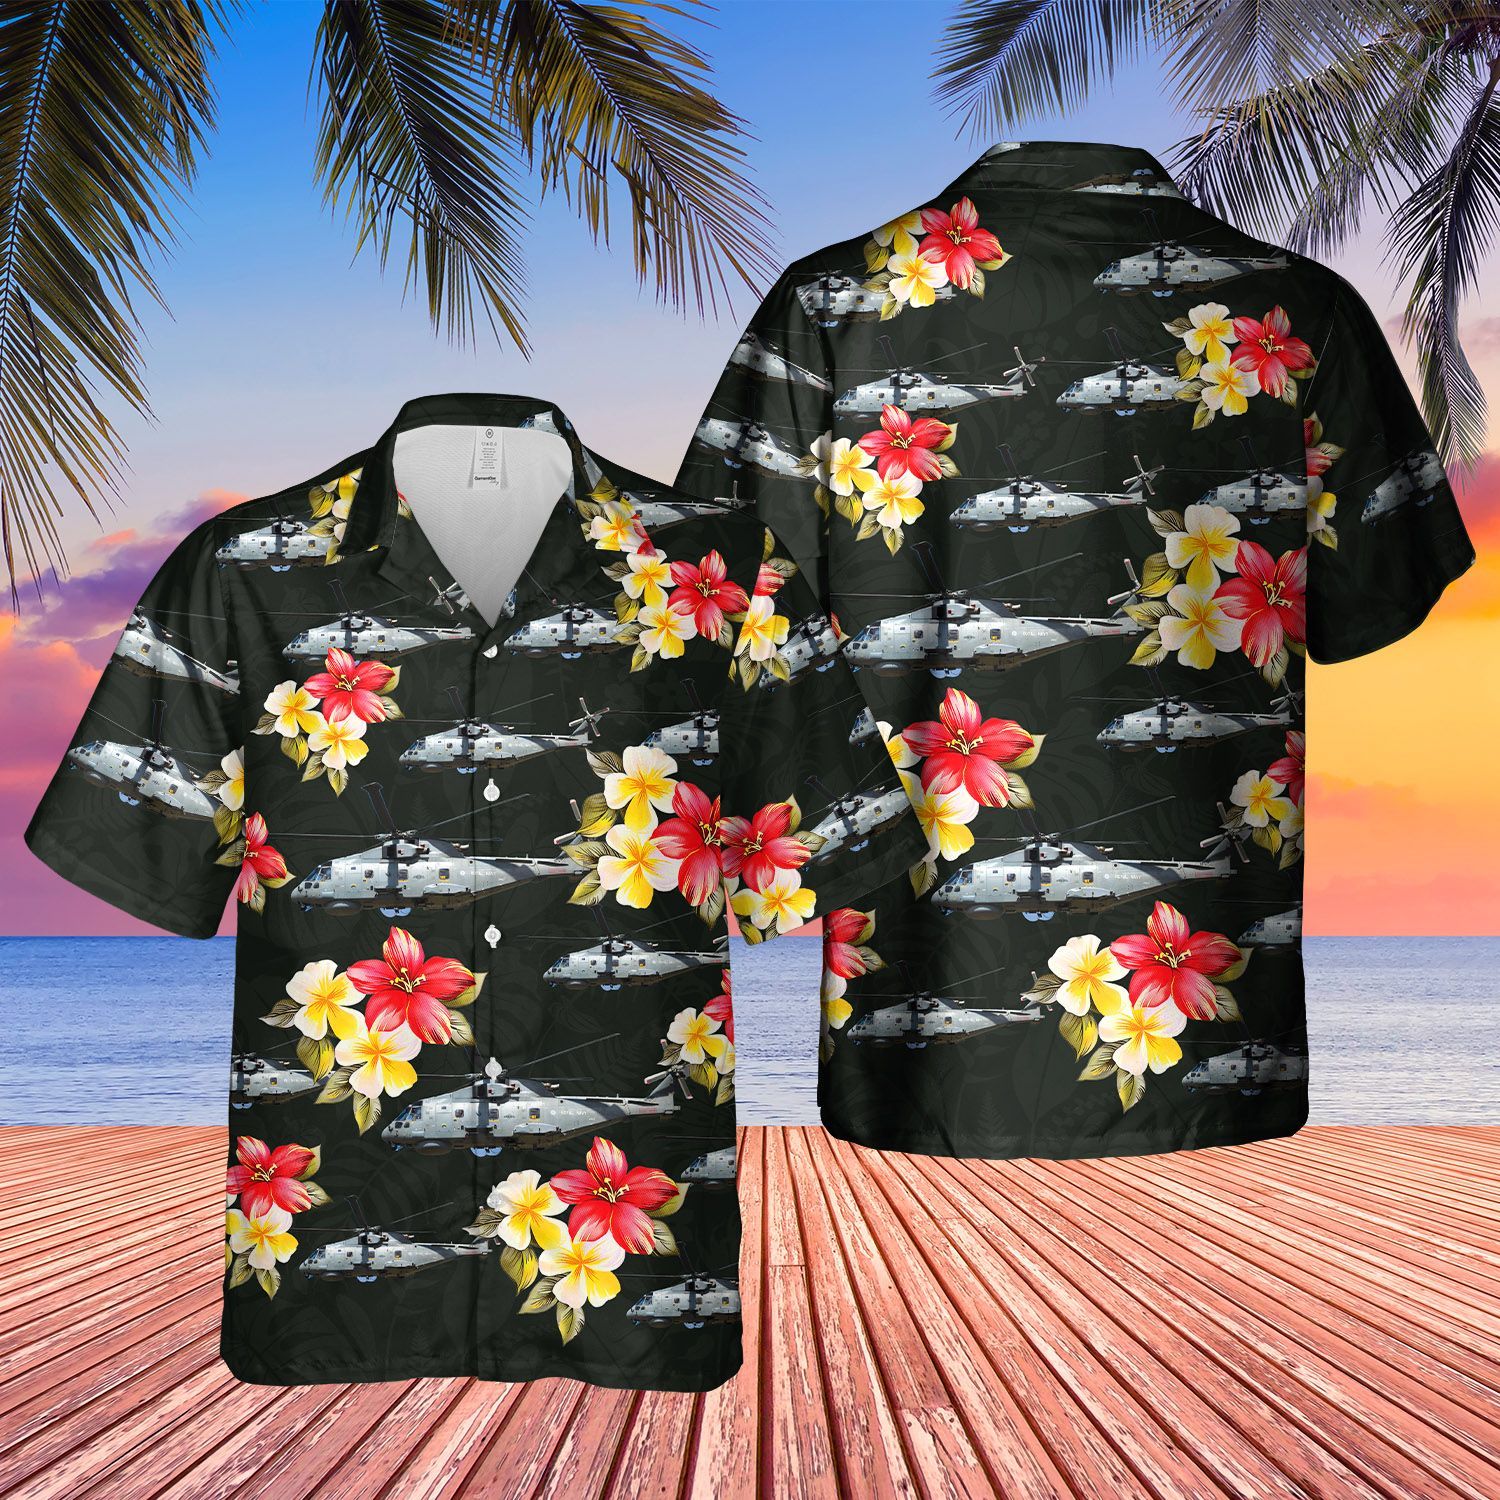 If you want a new hawaiian set for this summer, be sure to keep reading! 12